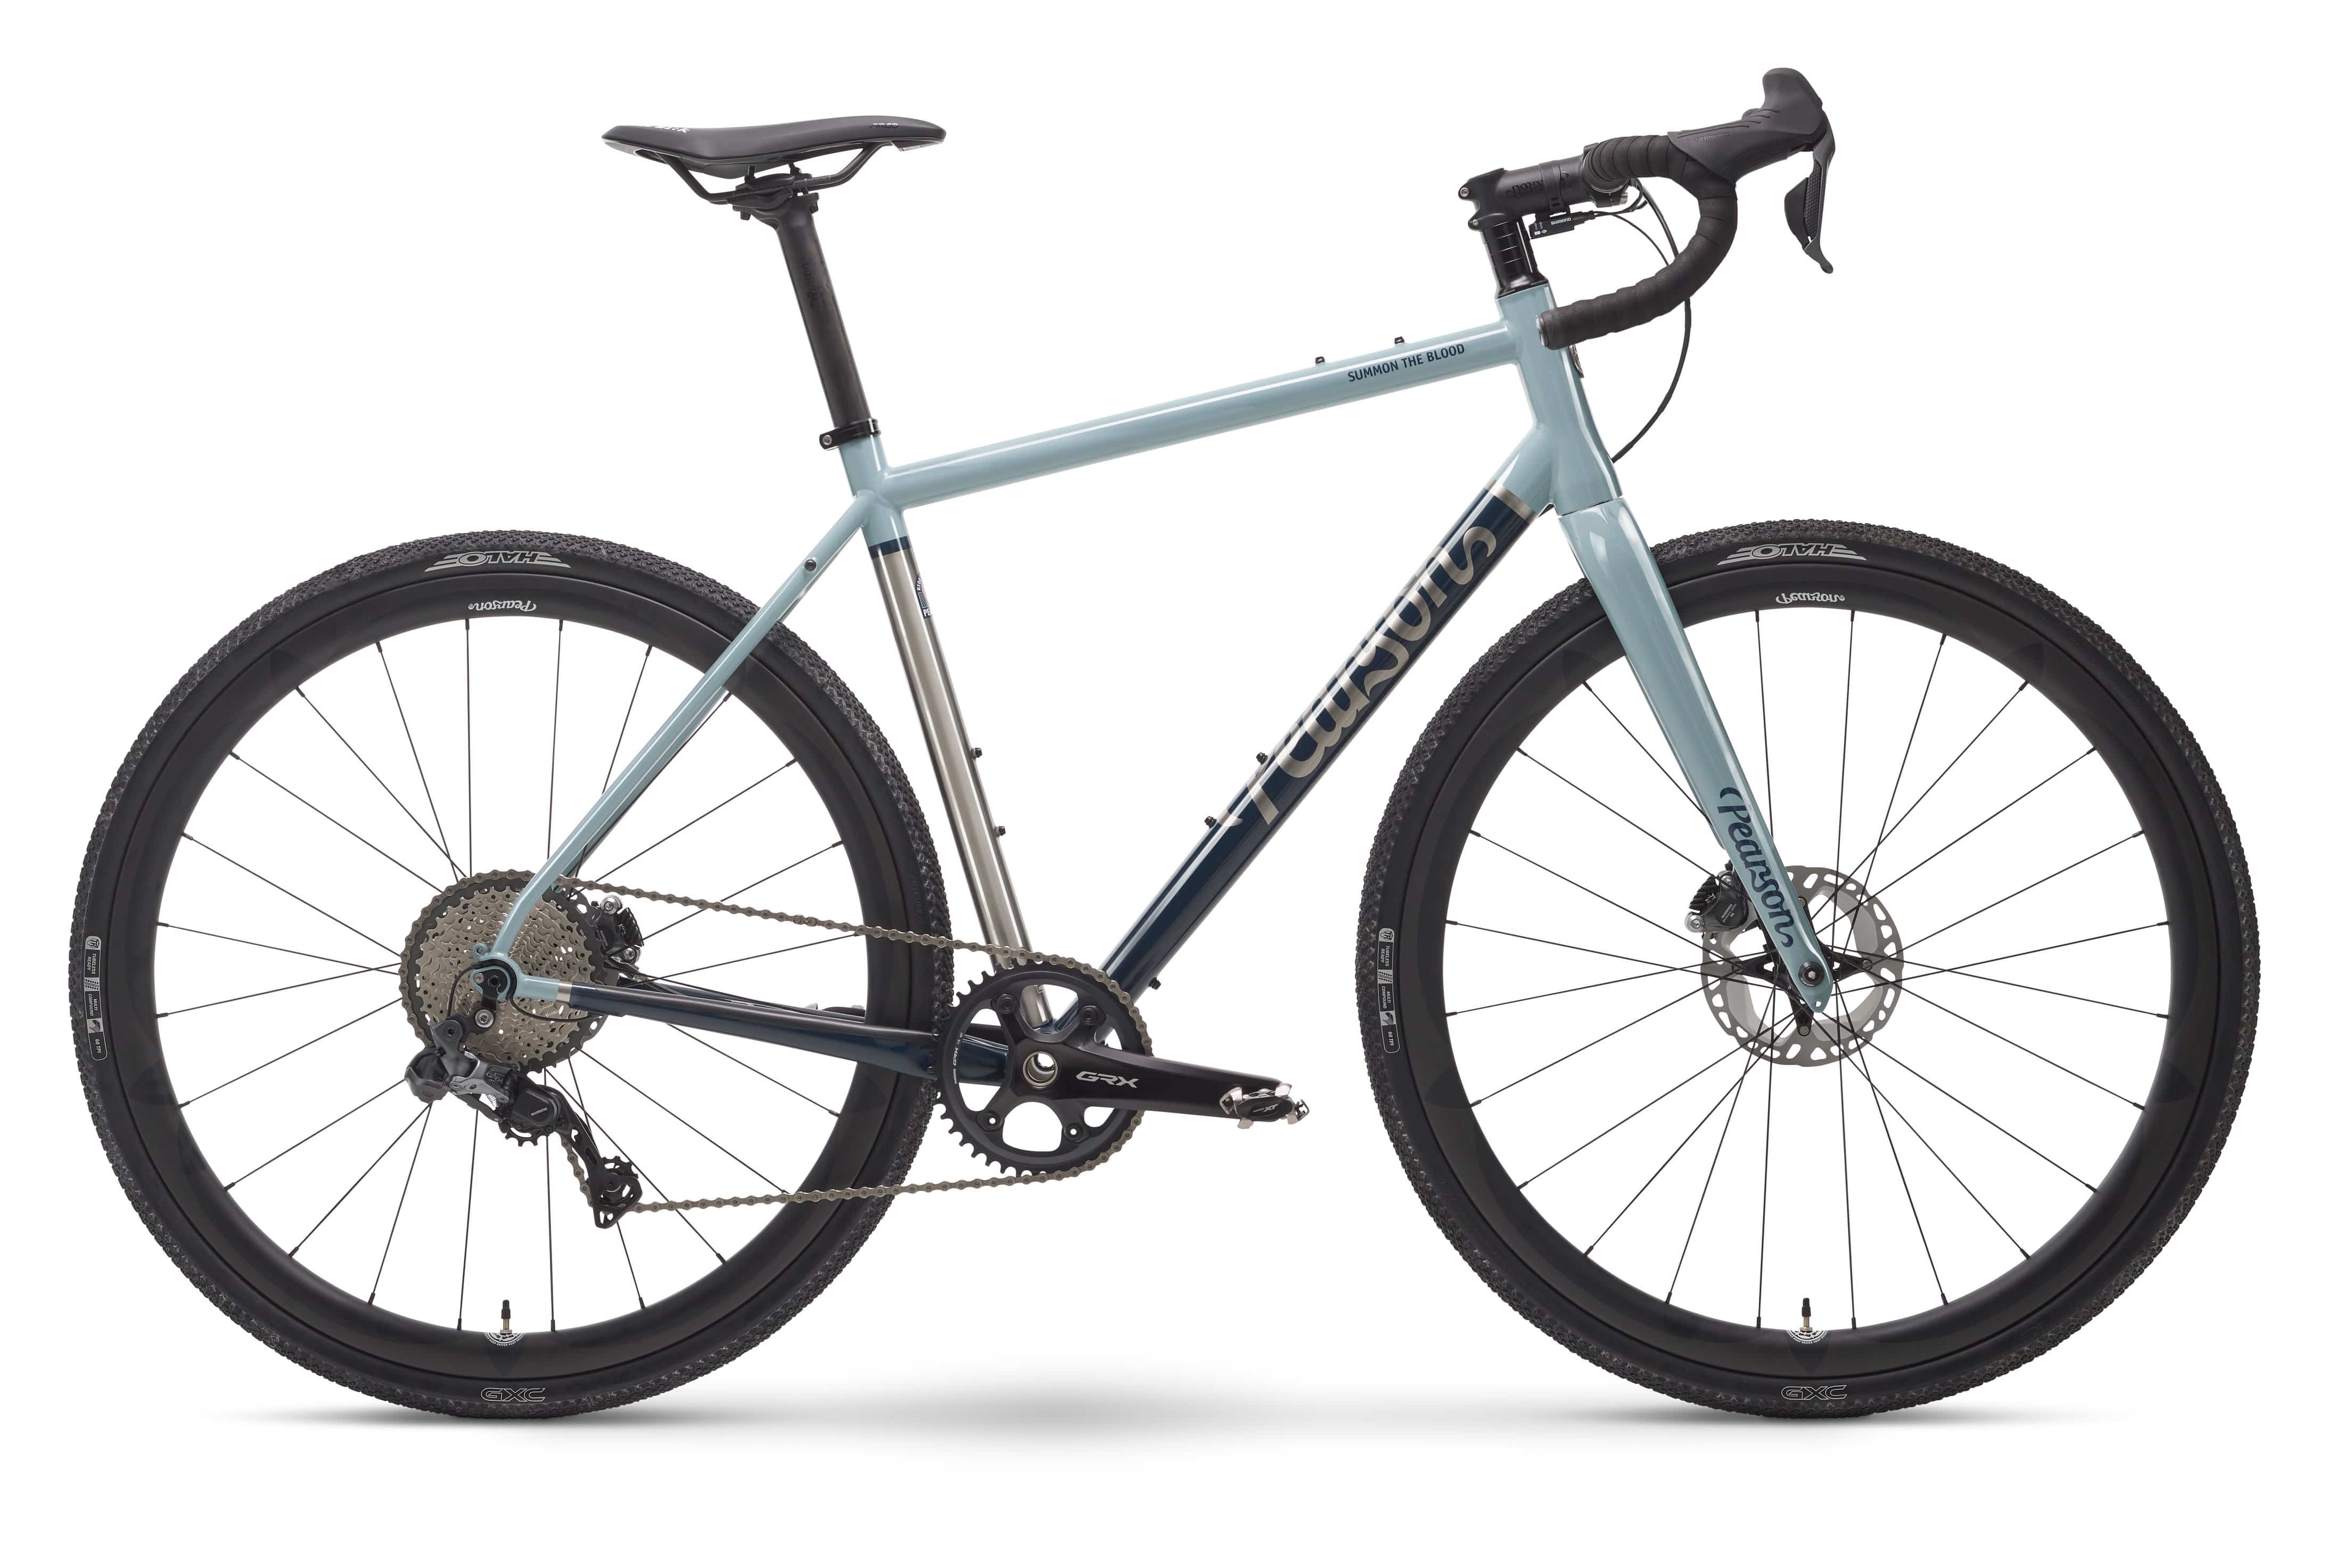 Pcs  Summon The Blood - Titanium Gravel Bike  Small / Blu-tack / Grx815 ElectronicandHoopdriver Bump And Grind Carbon Wheels